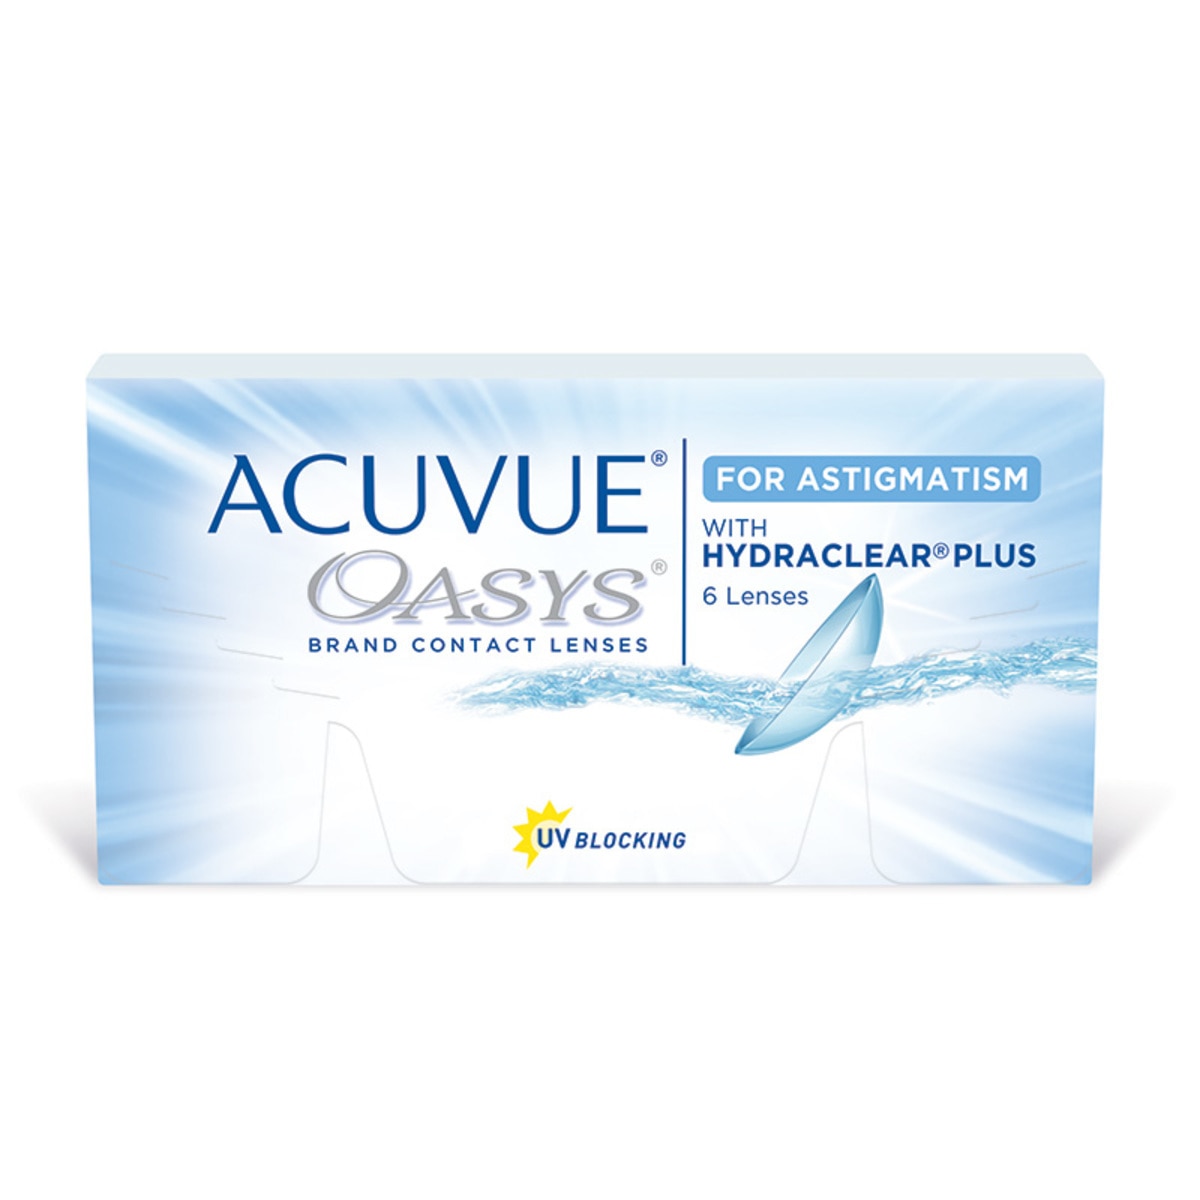 ACUVUE OASYS® con HYDRACLEAR Plus® para Astigmatismo (D -3.75, Cyl/Axis -1.75/50)